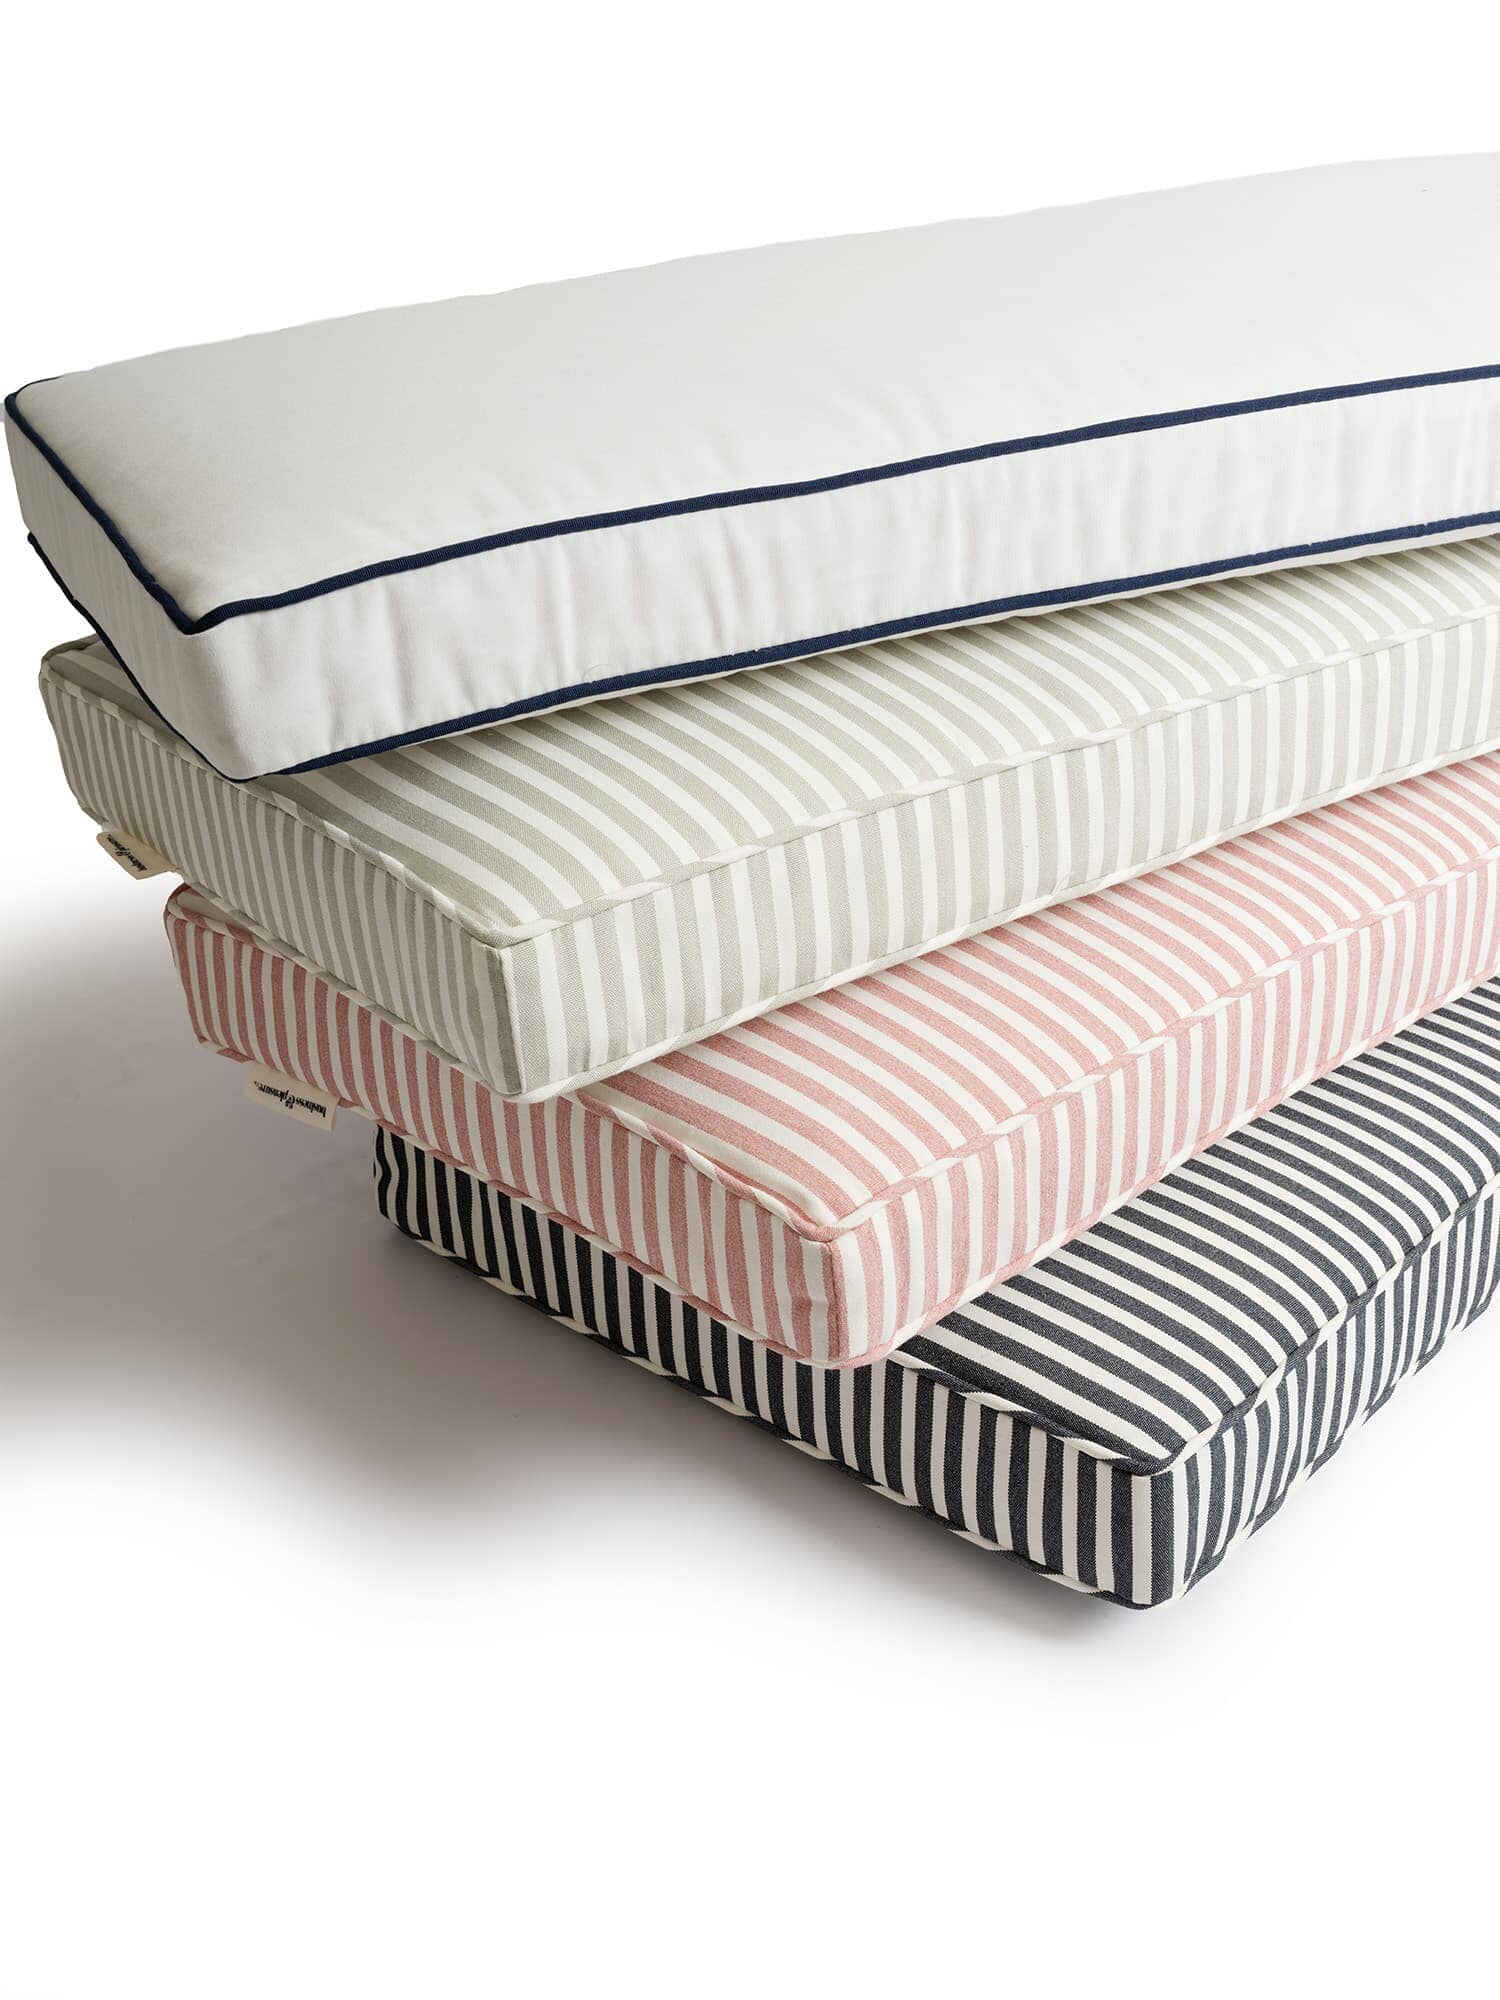 stack of 4 bench pillows